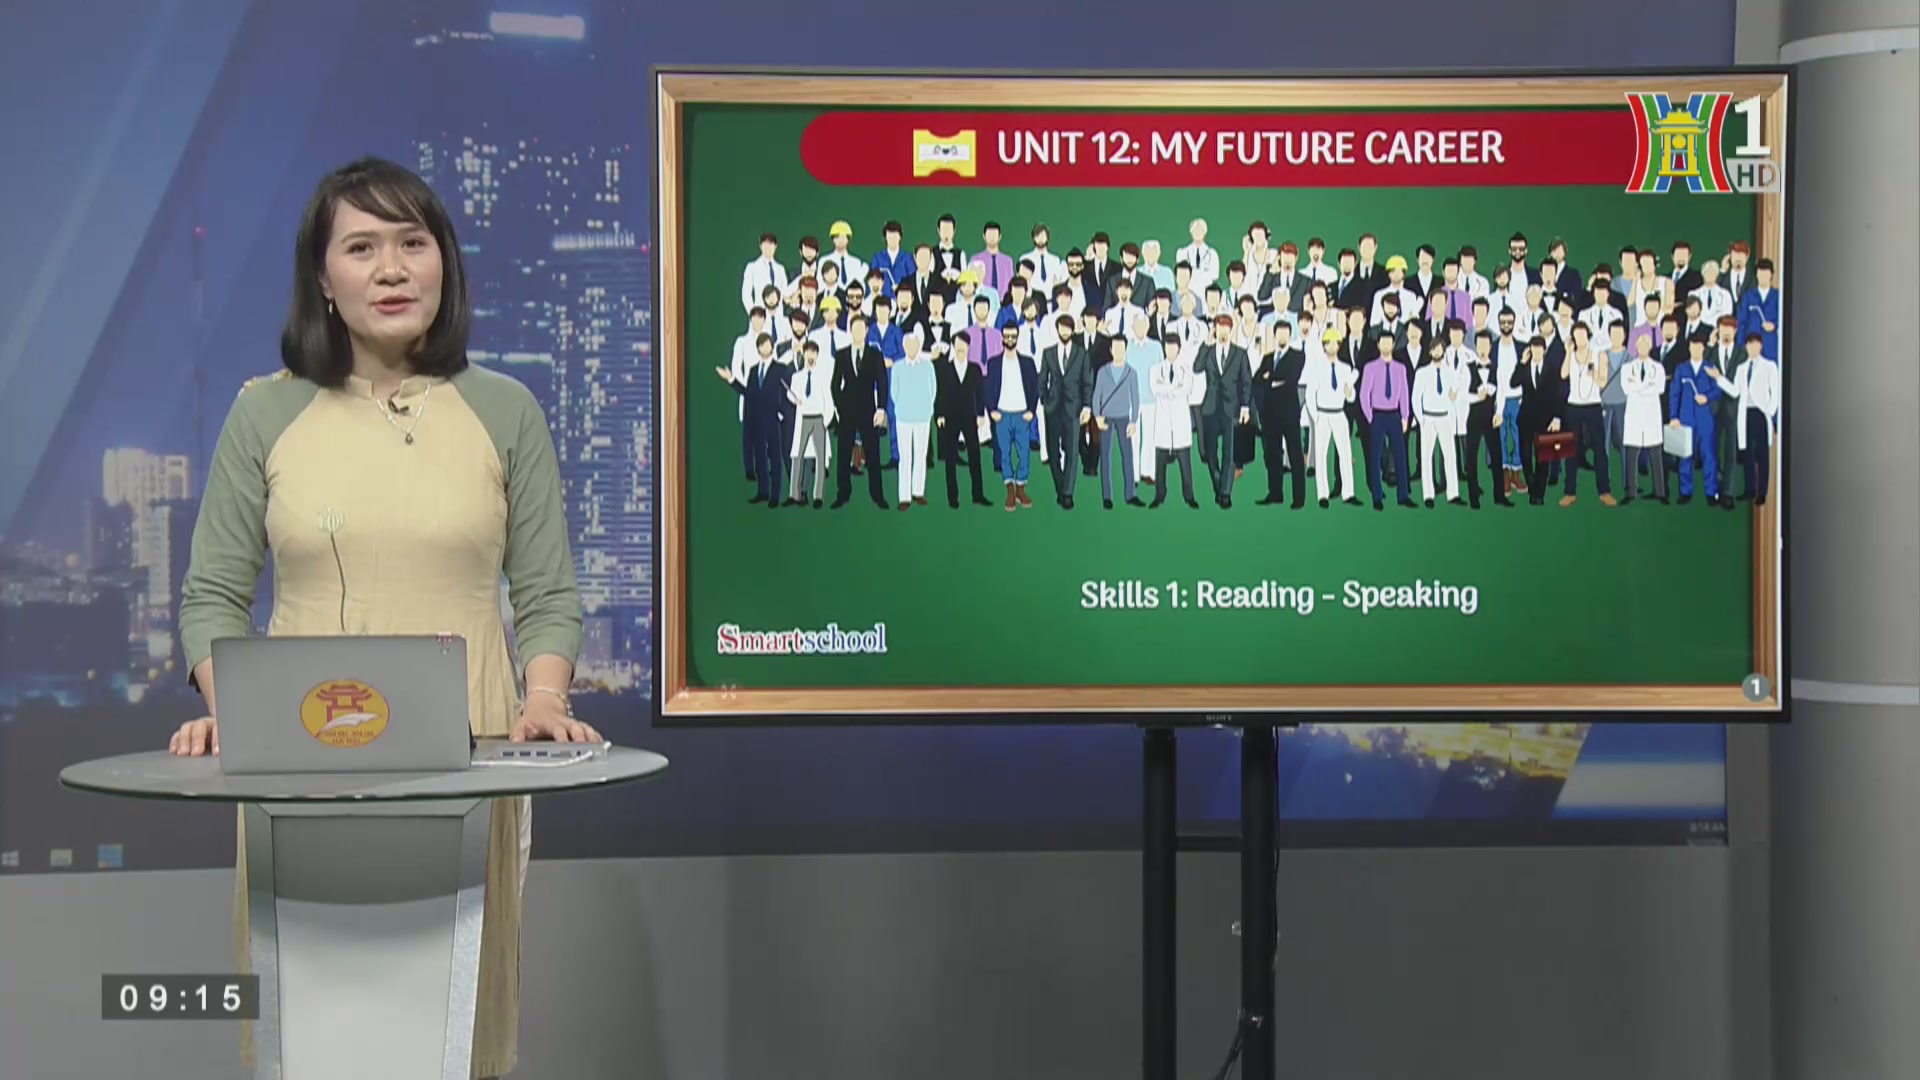 Tiếng anh lớp 9: Unit 12 – My future career – Skills 1 Reading and Speaking (9h15 ngày 15/6/2020)